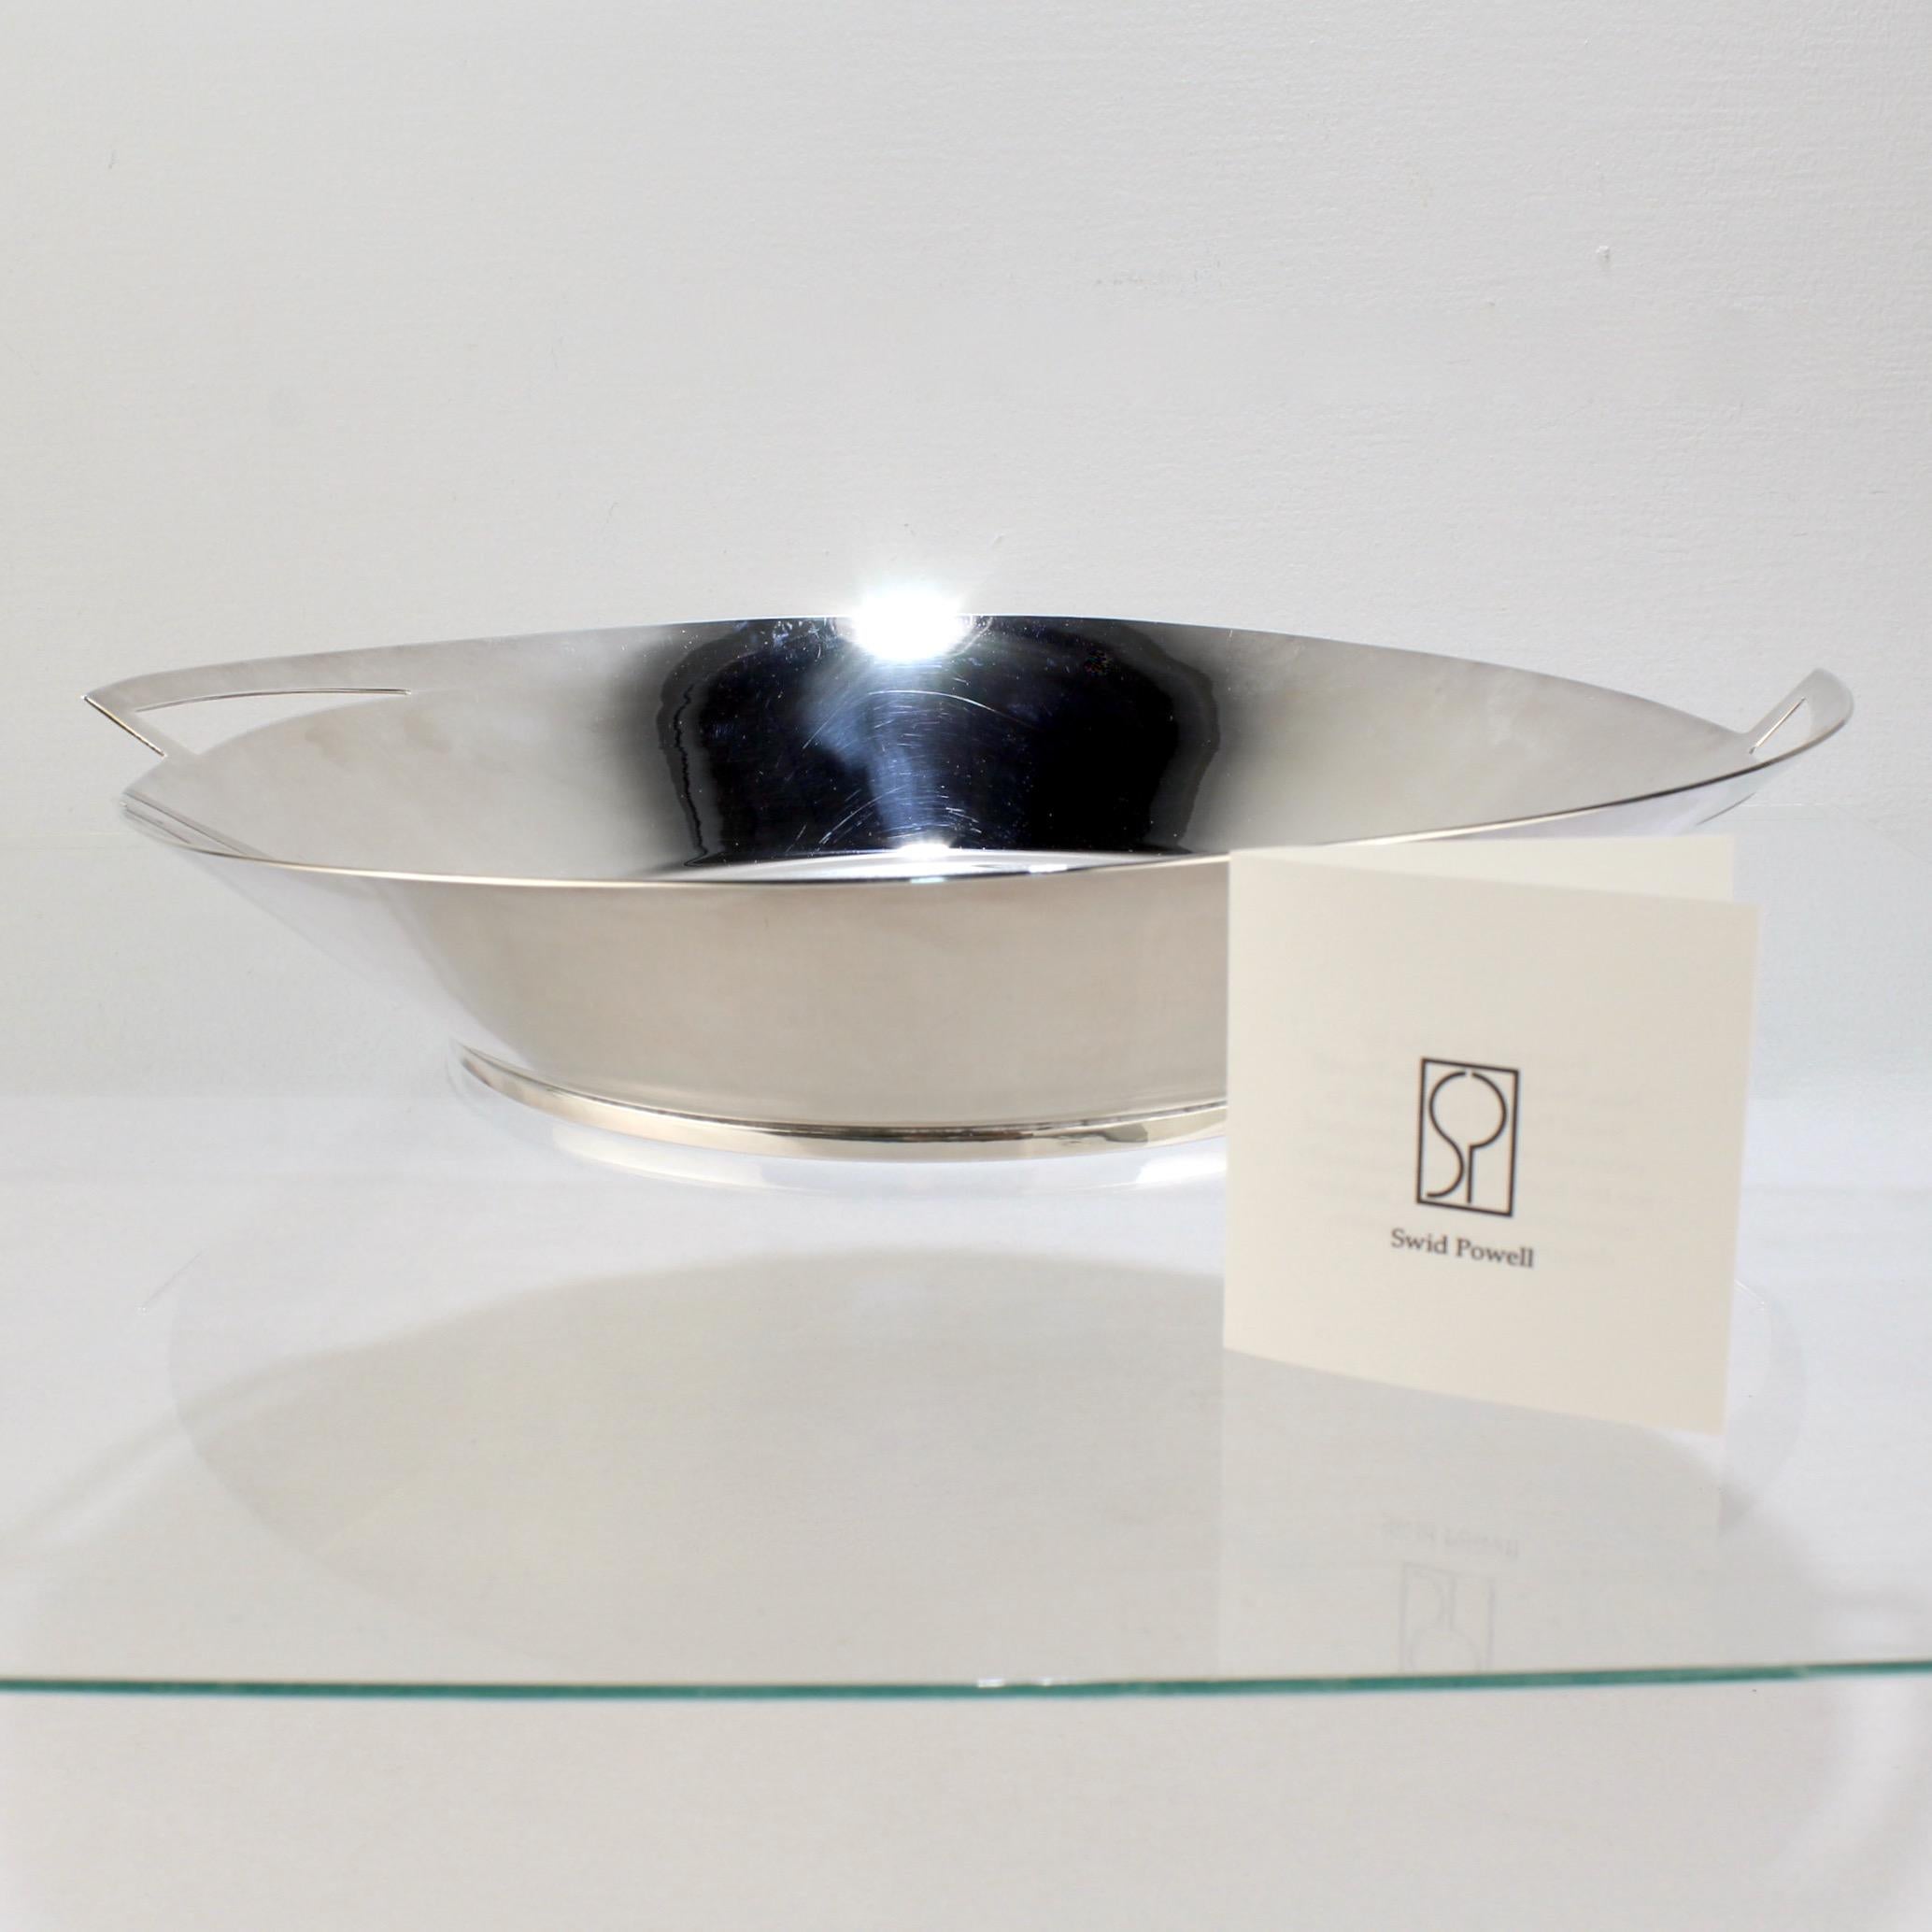 Large Vintage Silver Plate 'Lily' Bowl by Elsa Rady by Swid Powell For Sale 7